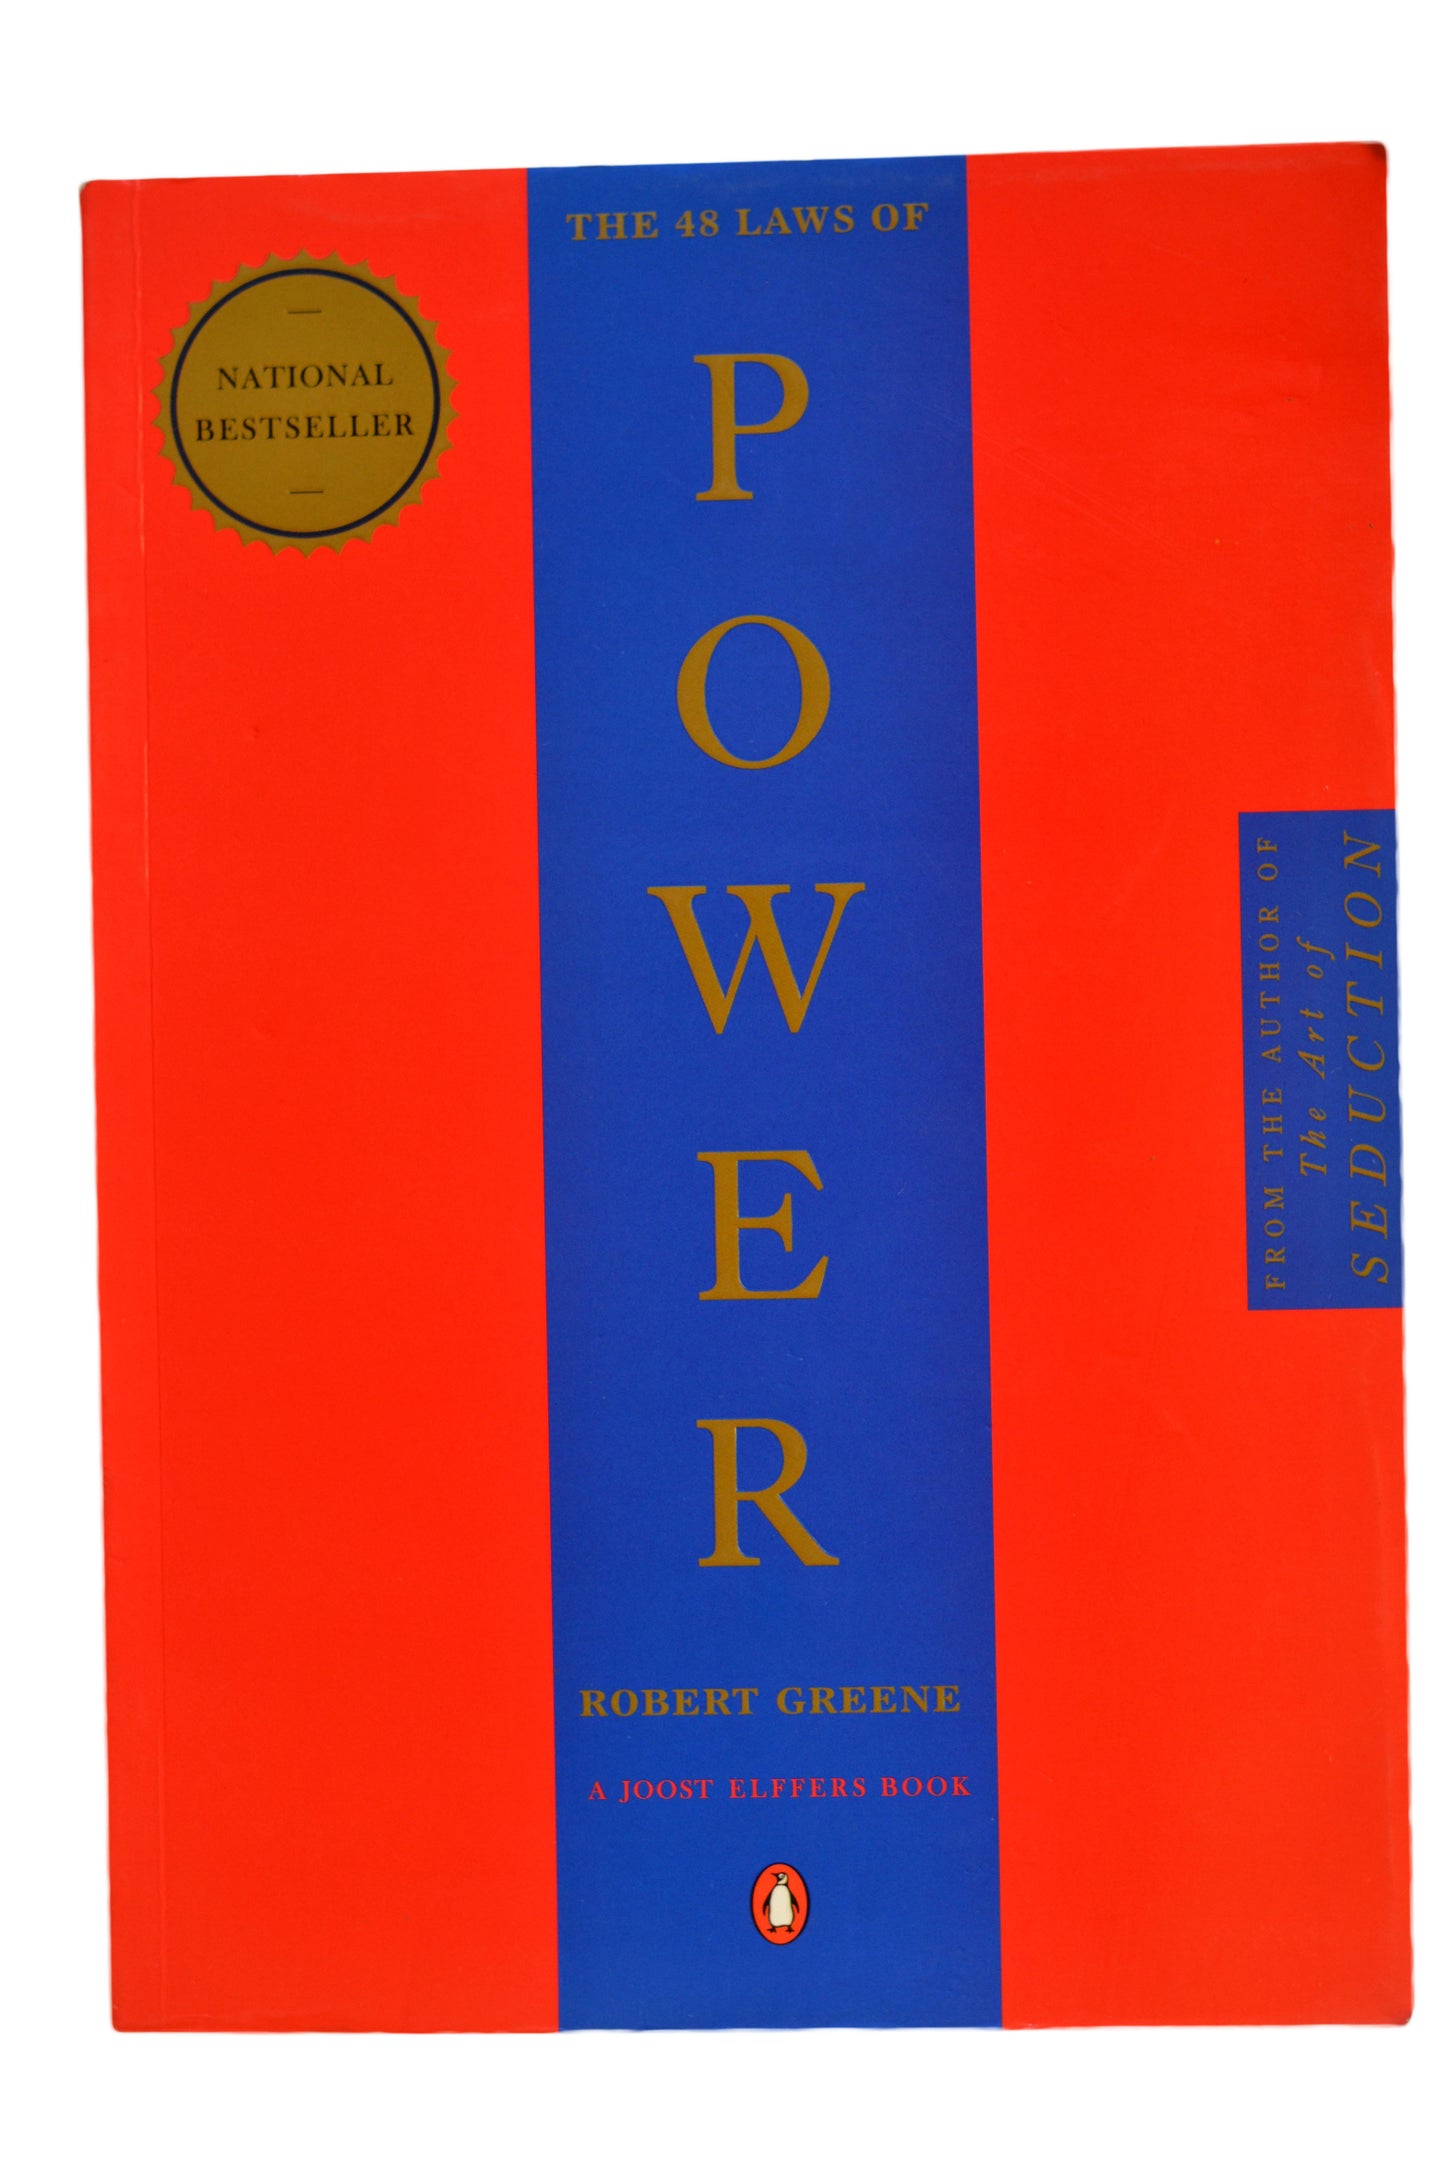 THE 46 LAWS OF POWER